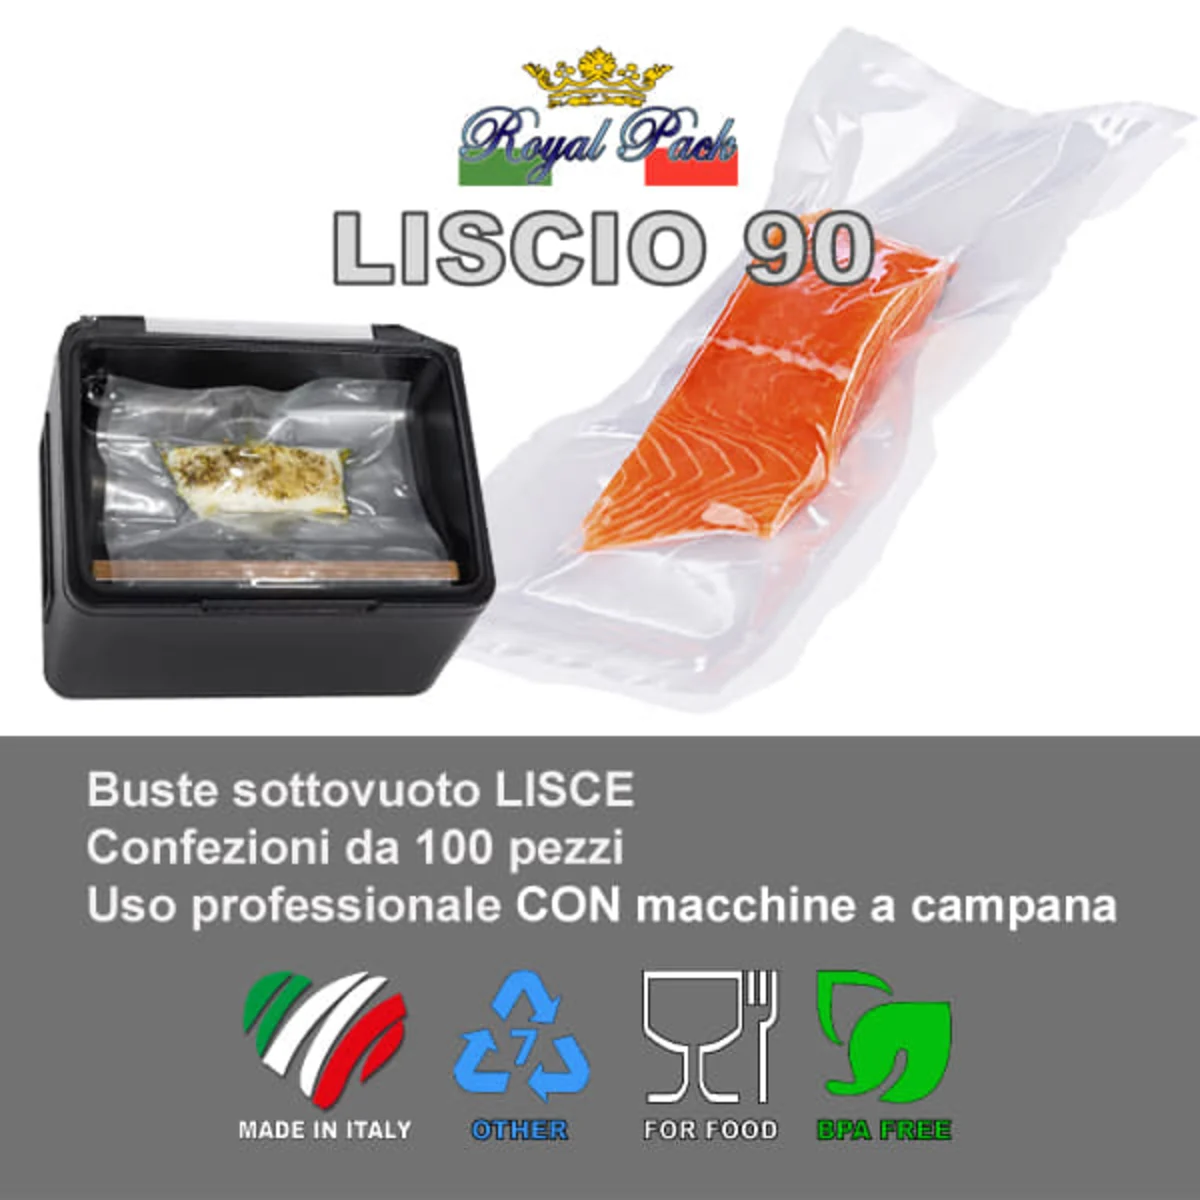 Royal Pack Top Quality buste sottovuoto goffrate 105 micron